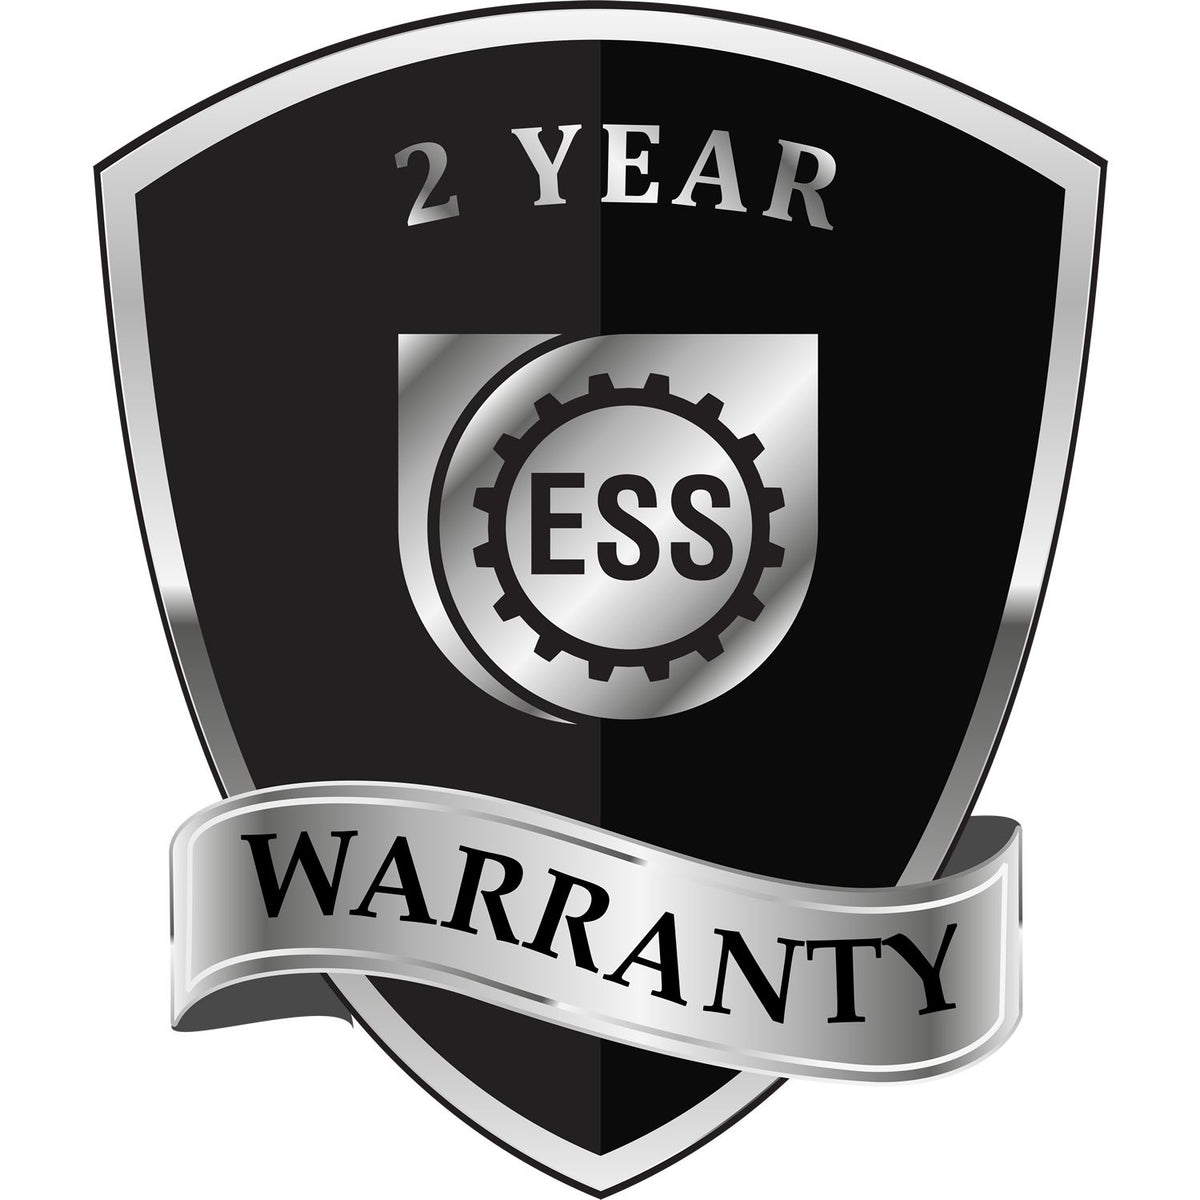 A badge or emblem showing a warranty icon for the State of Virginia Architectural Seal Embosser